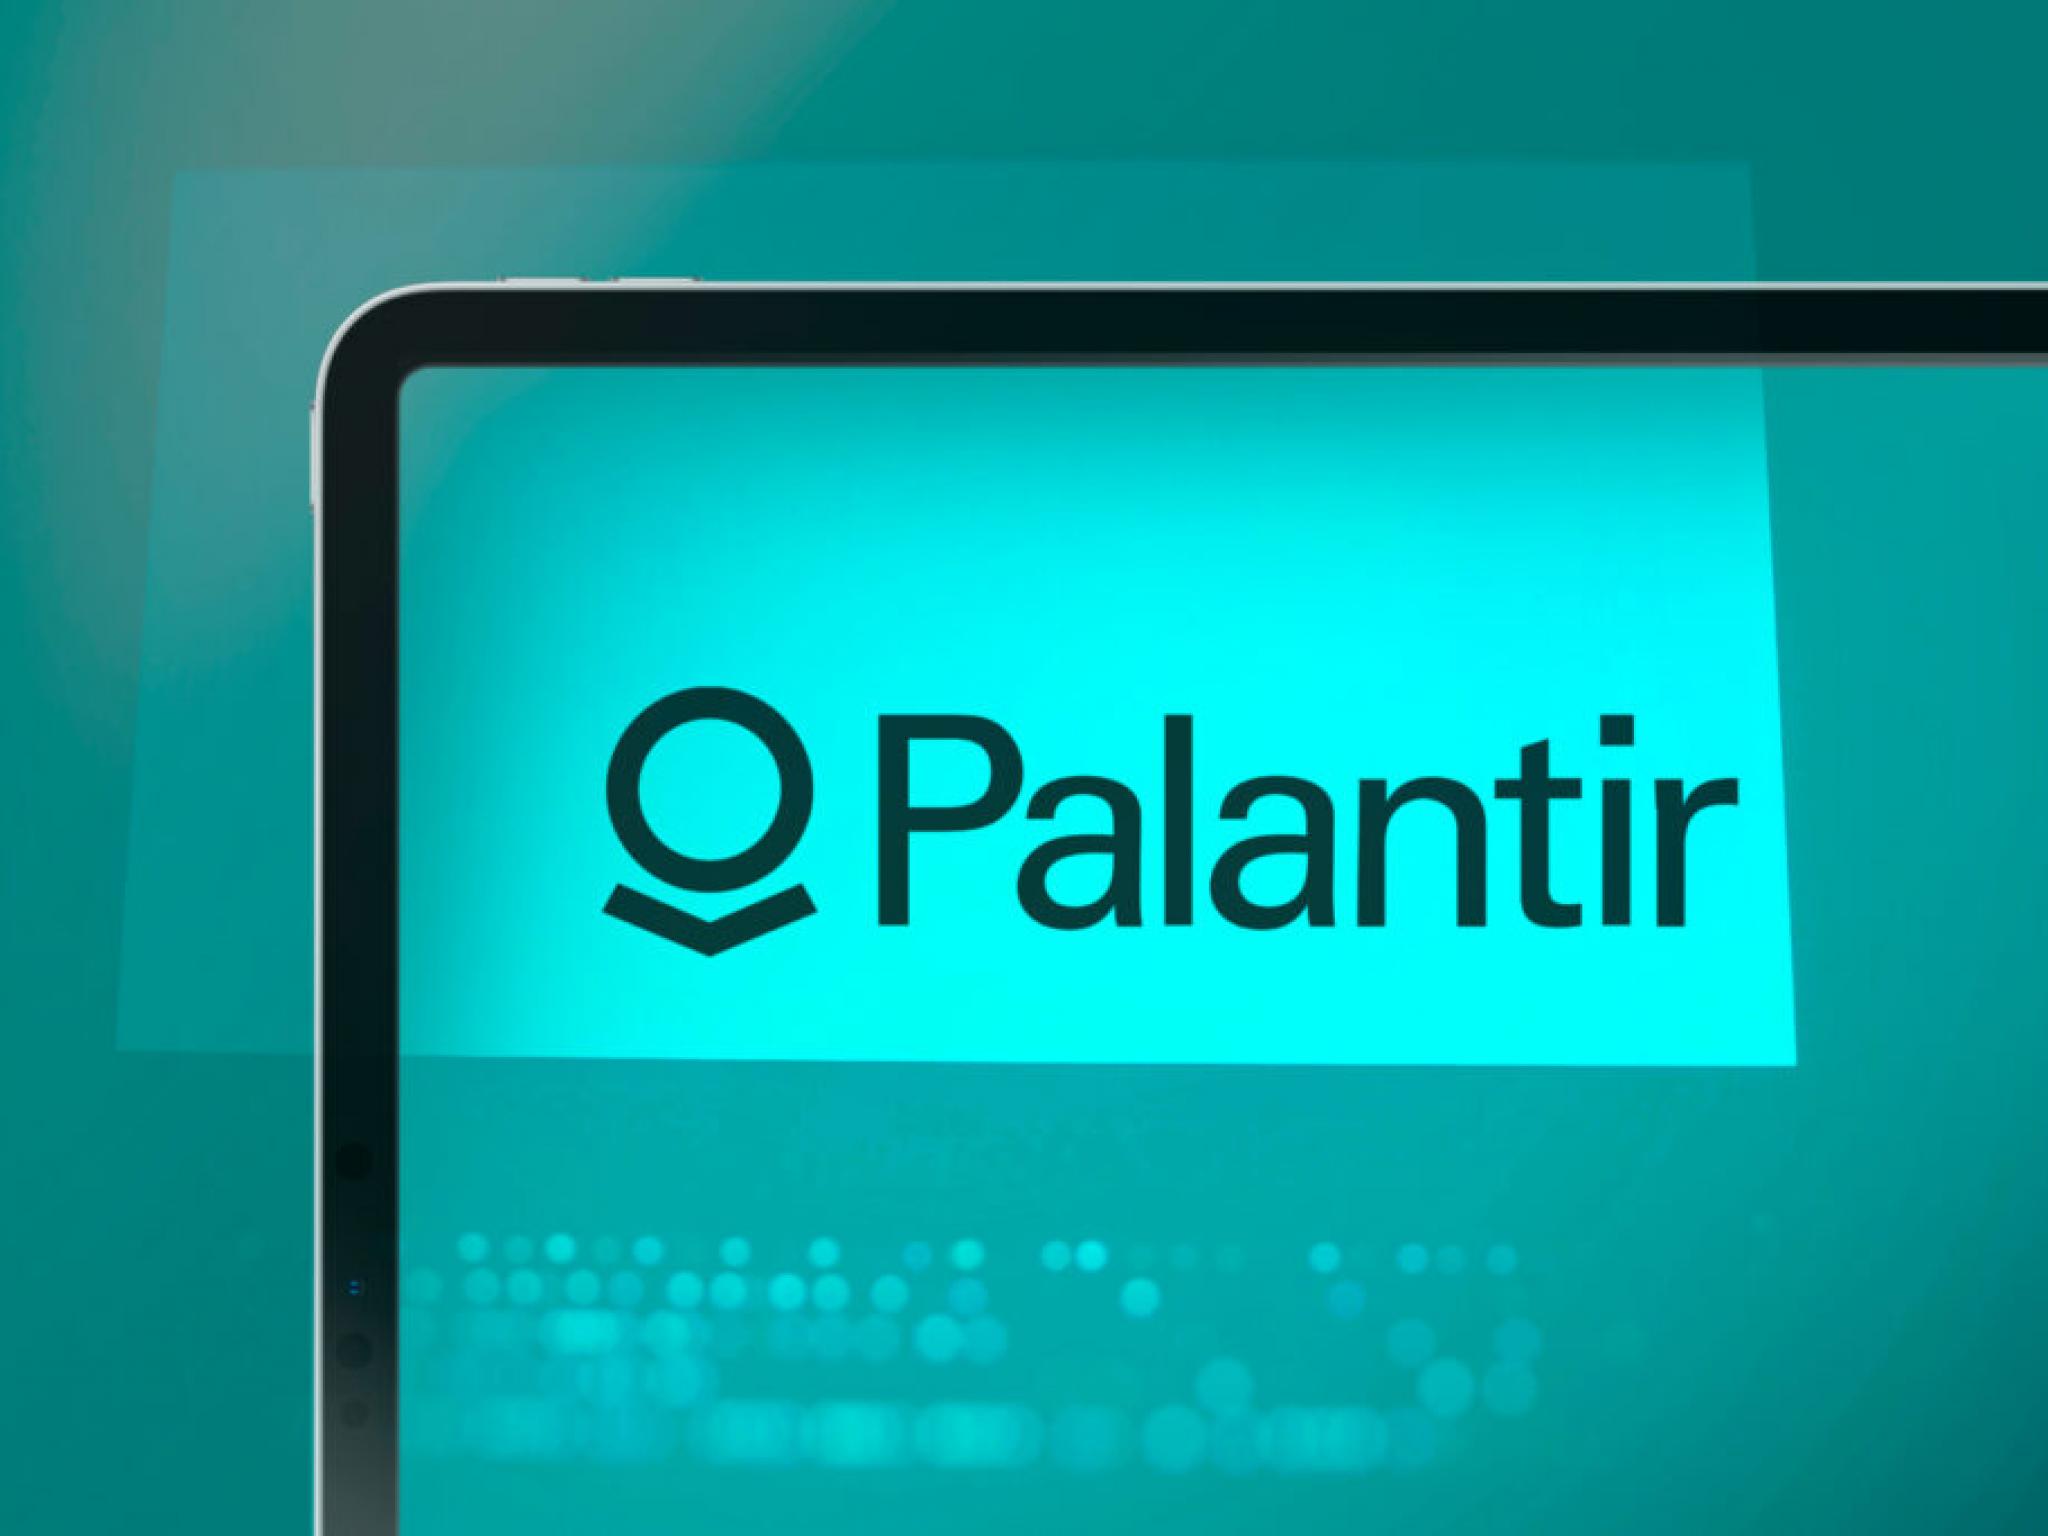  whats-going-on-with-palantir--oracle-shares-after-they-inked-partnership 